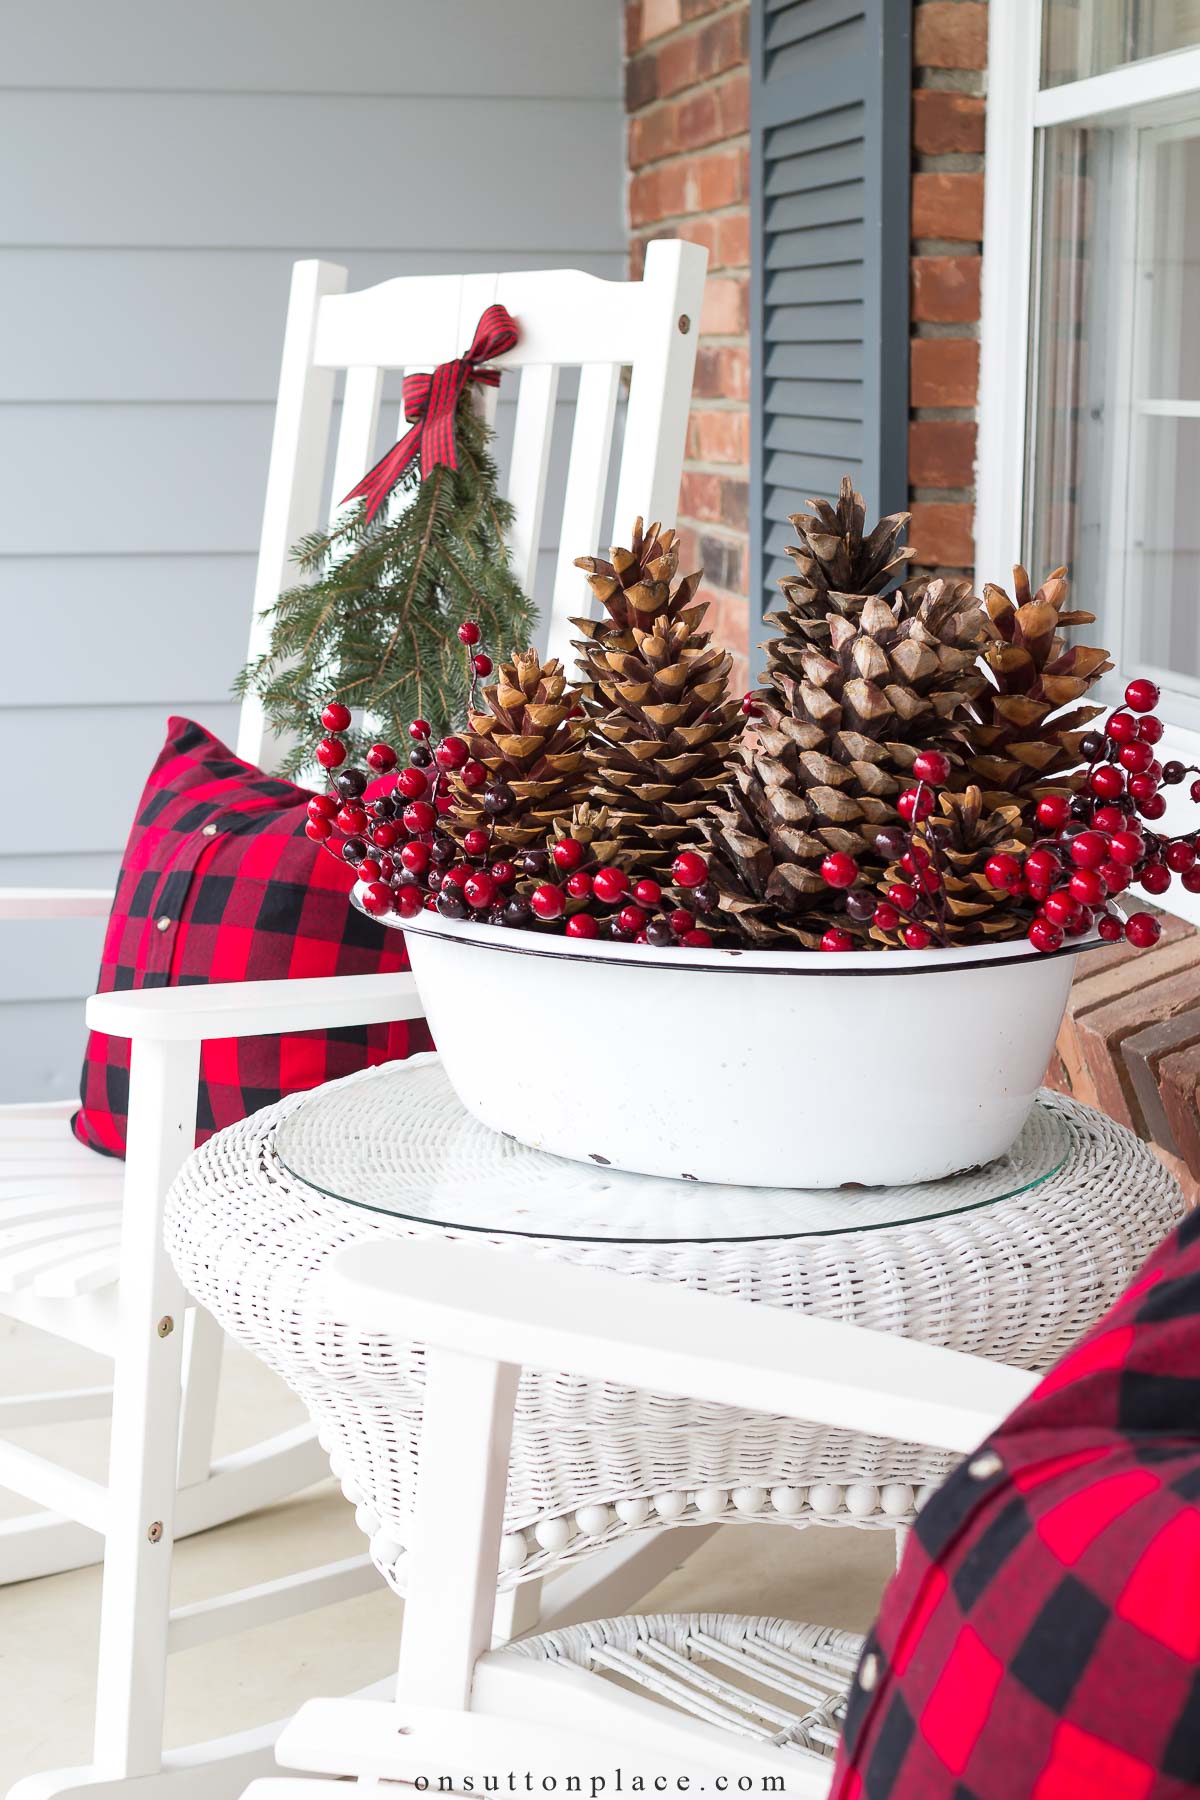 https://www.onsuttonplace.com/wp-content/uploads/2015/12/bucket-of-pine-cones-on-porch-2023.jpg